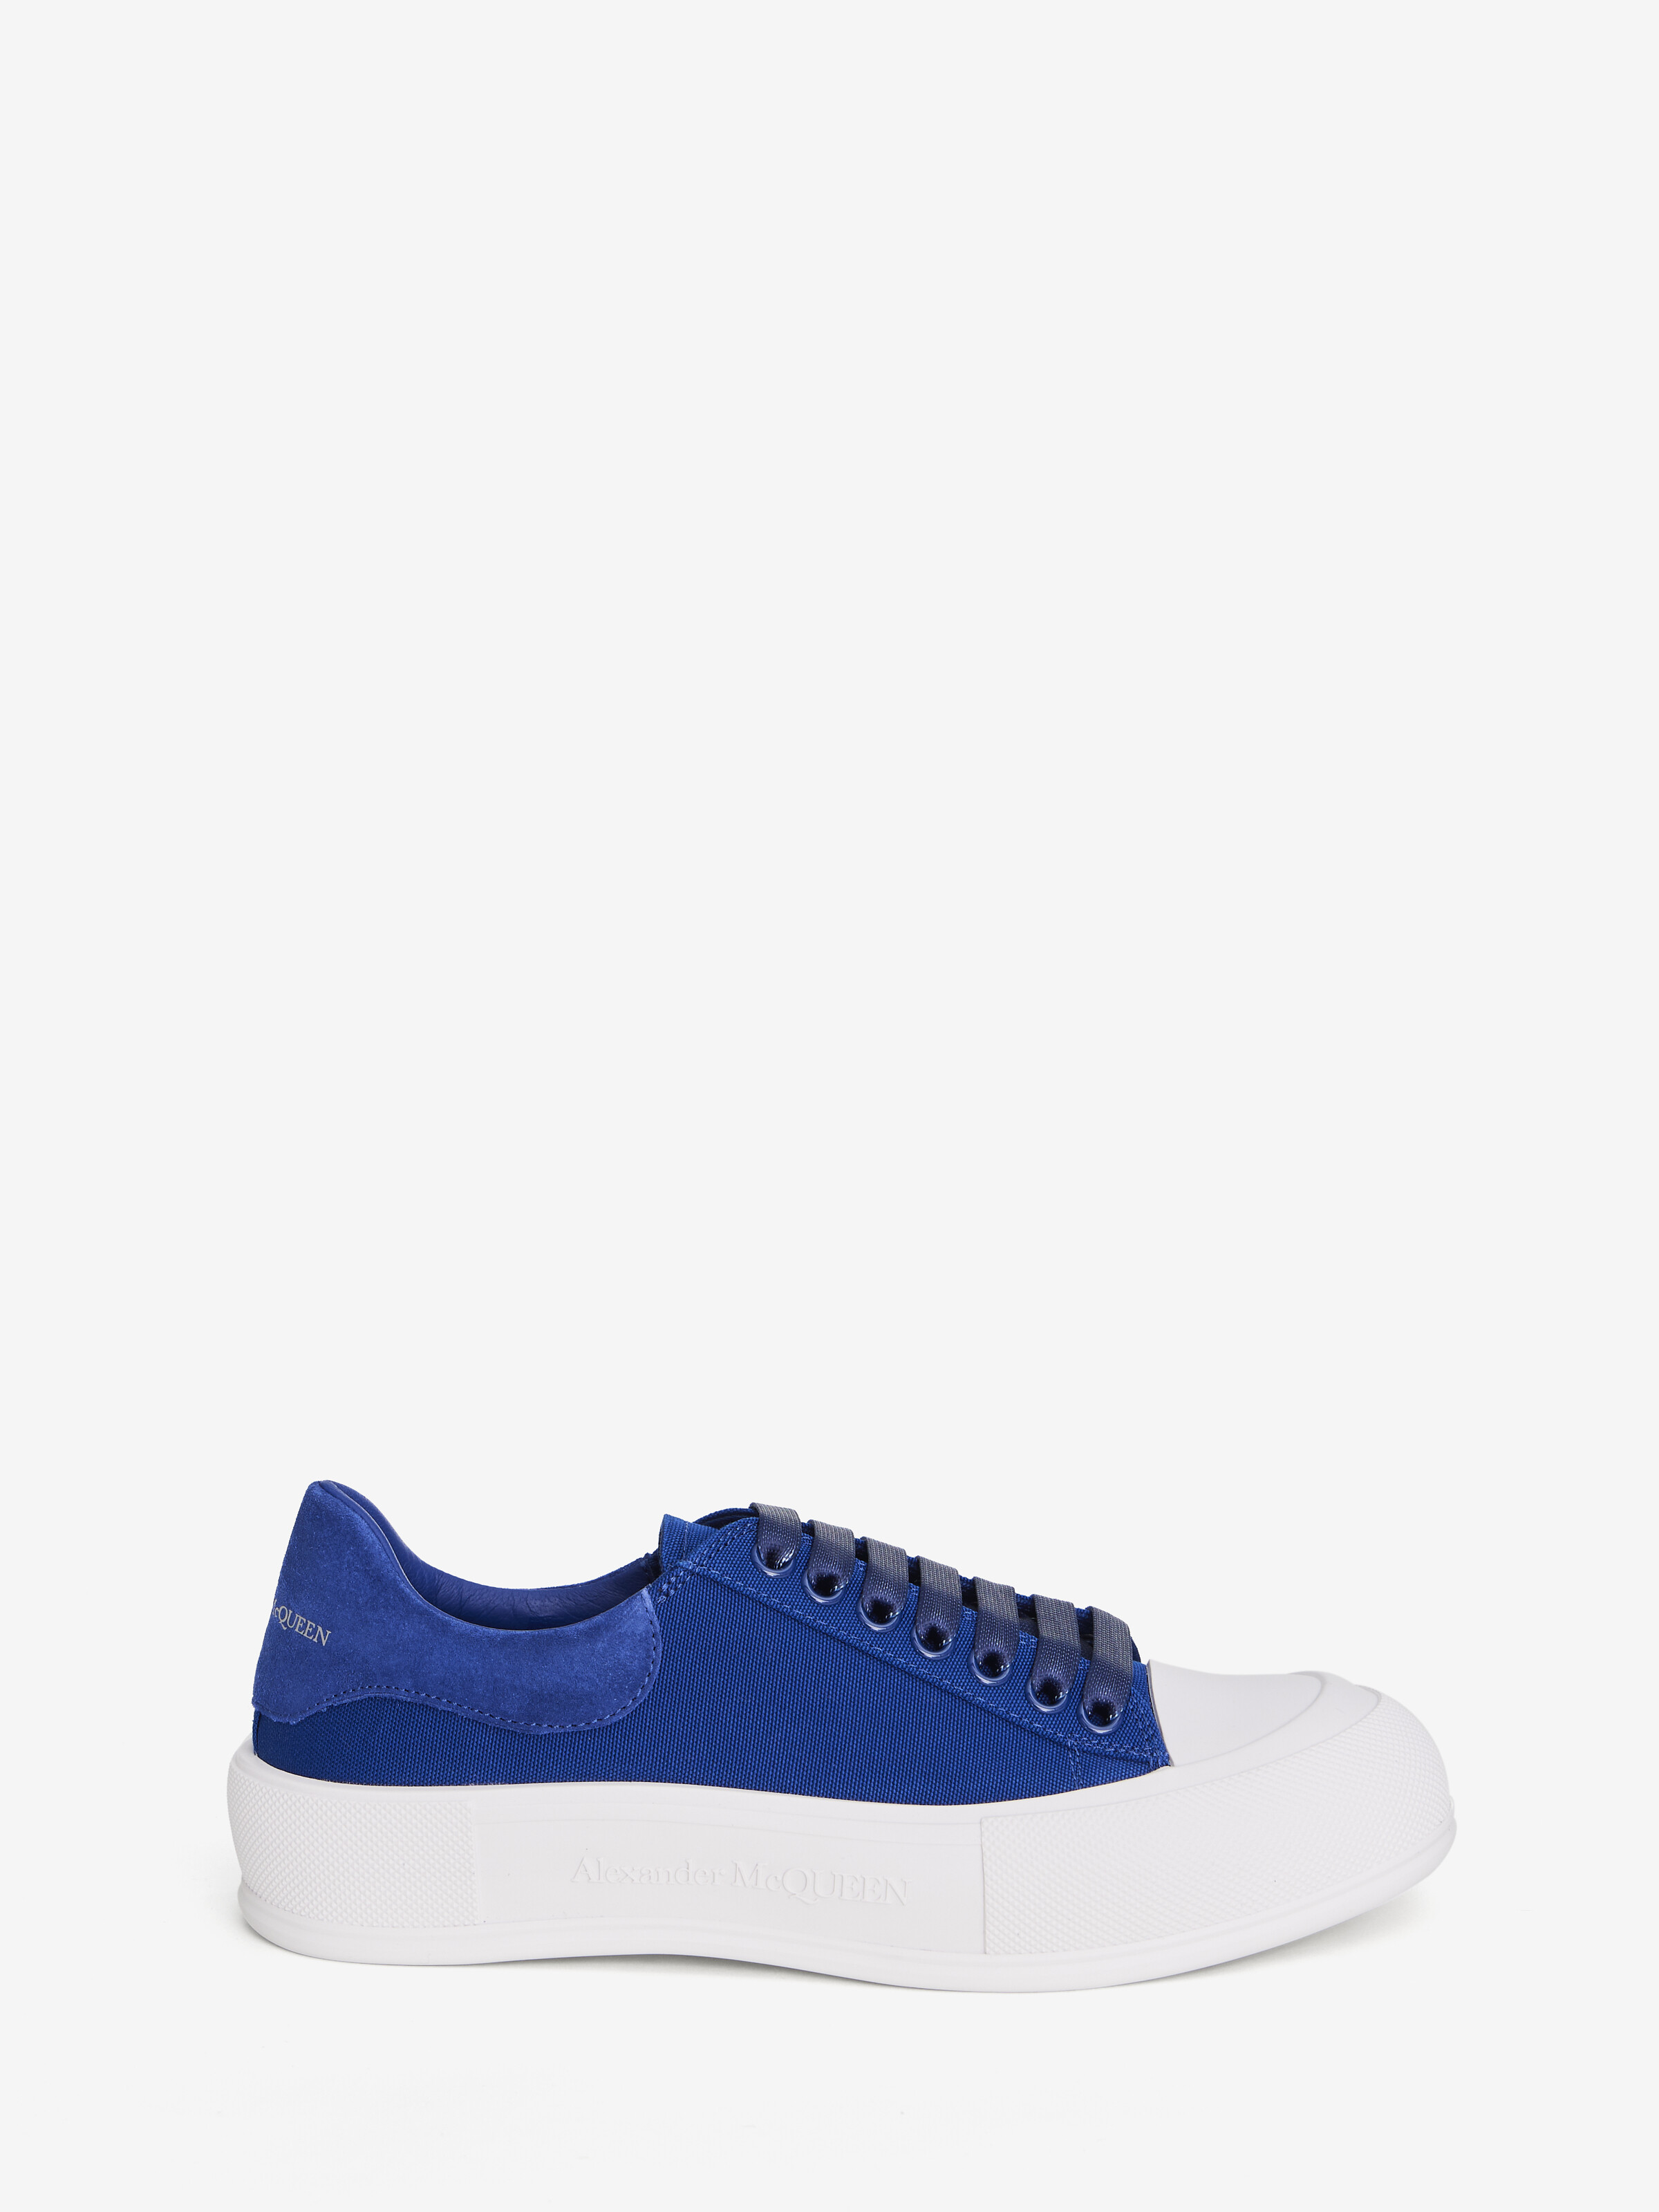 ALEXANDER MCQUEEN DECK LACE-UP PLIMSOLL,654594W4PQ1